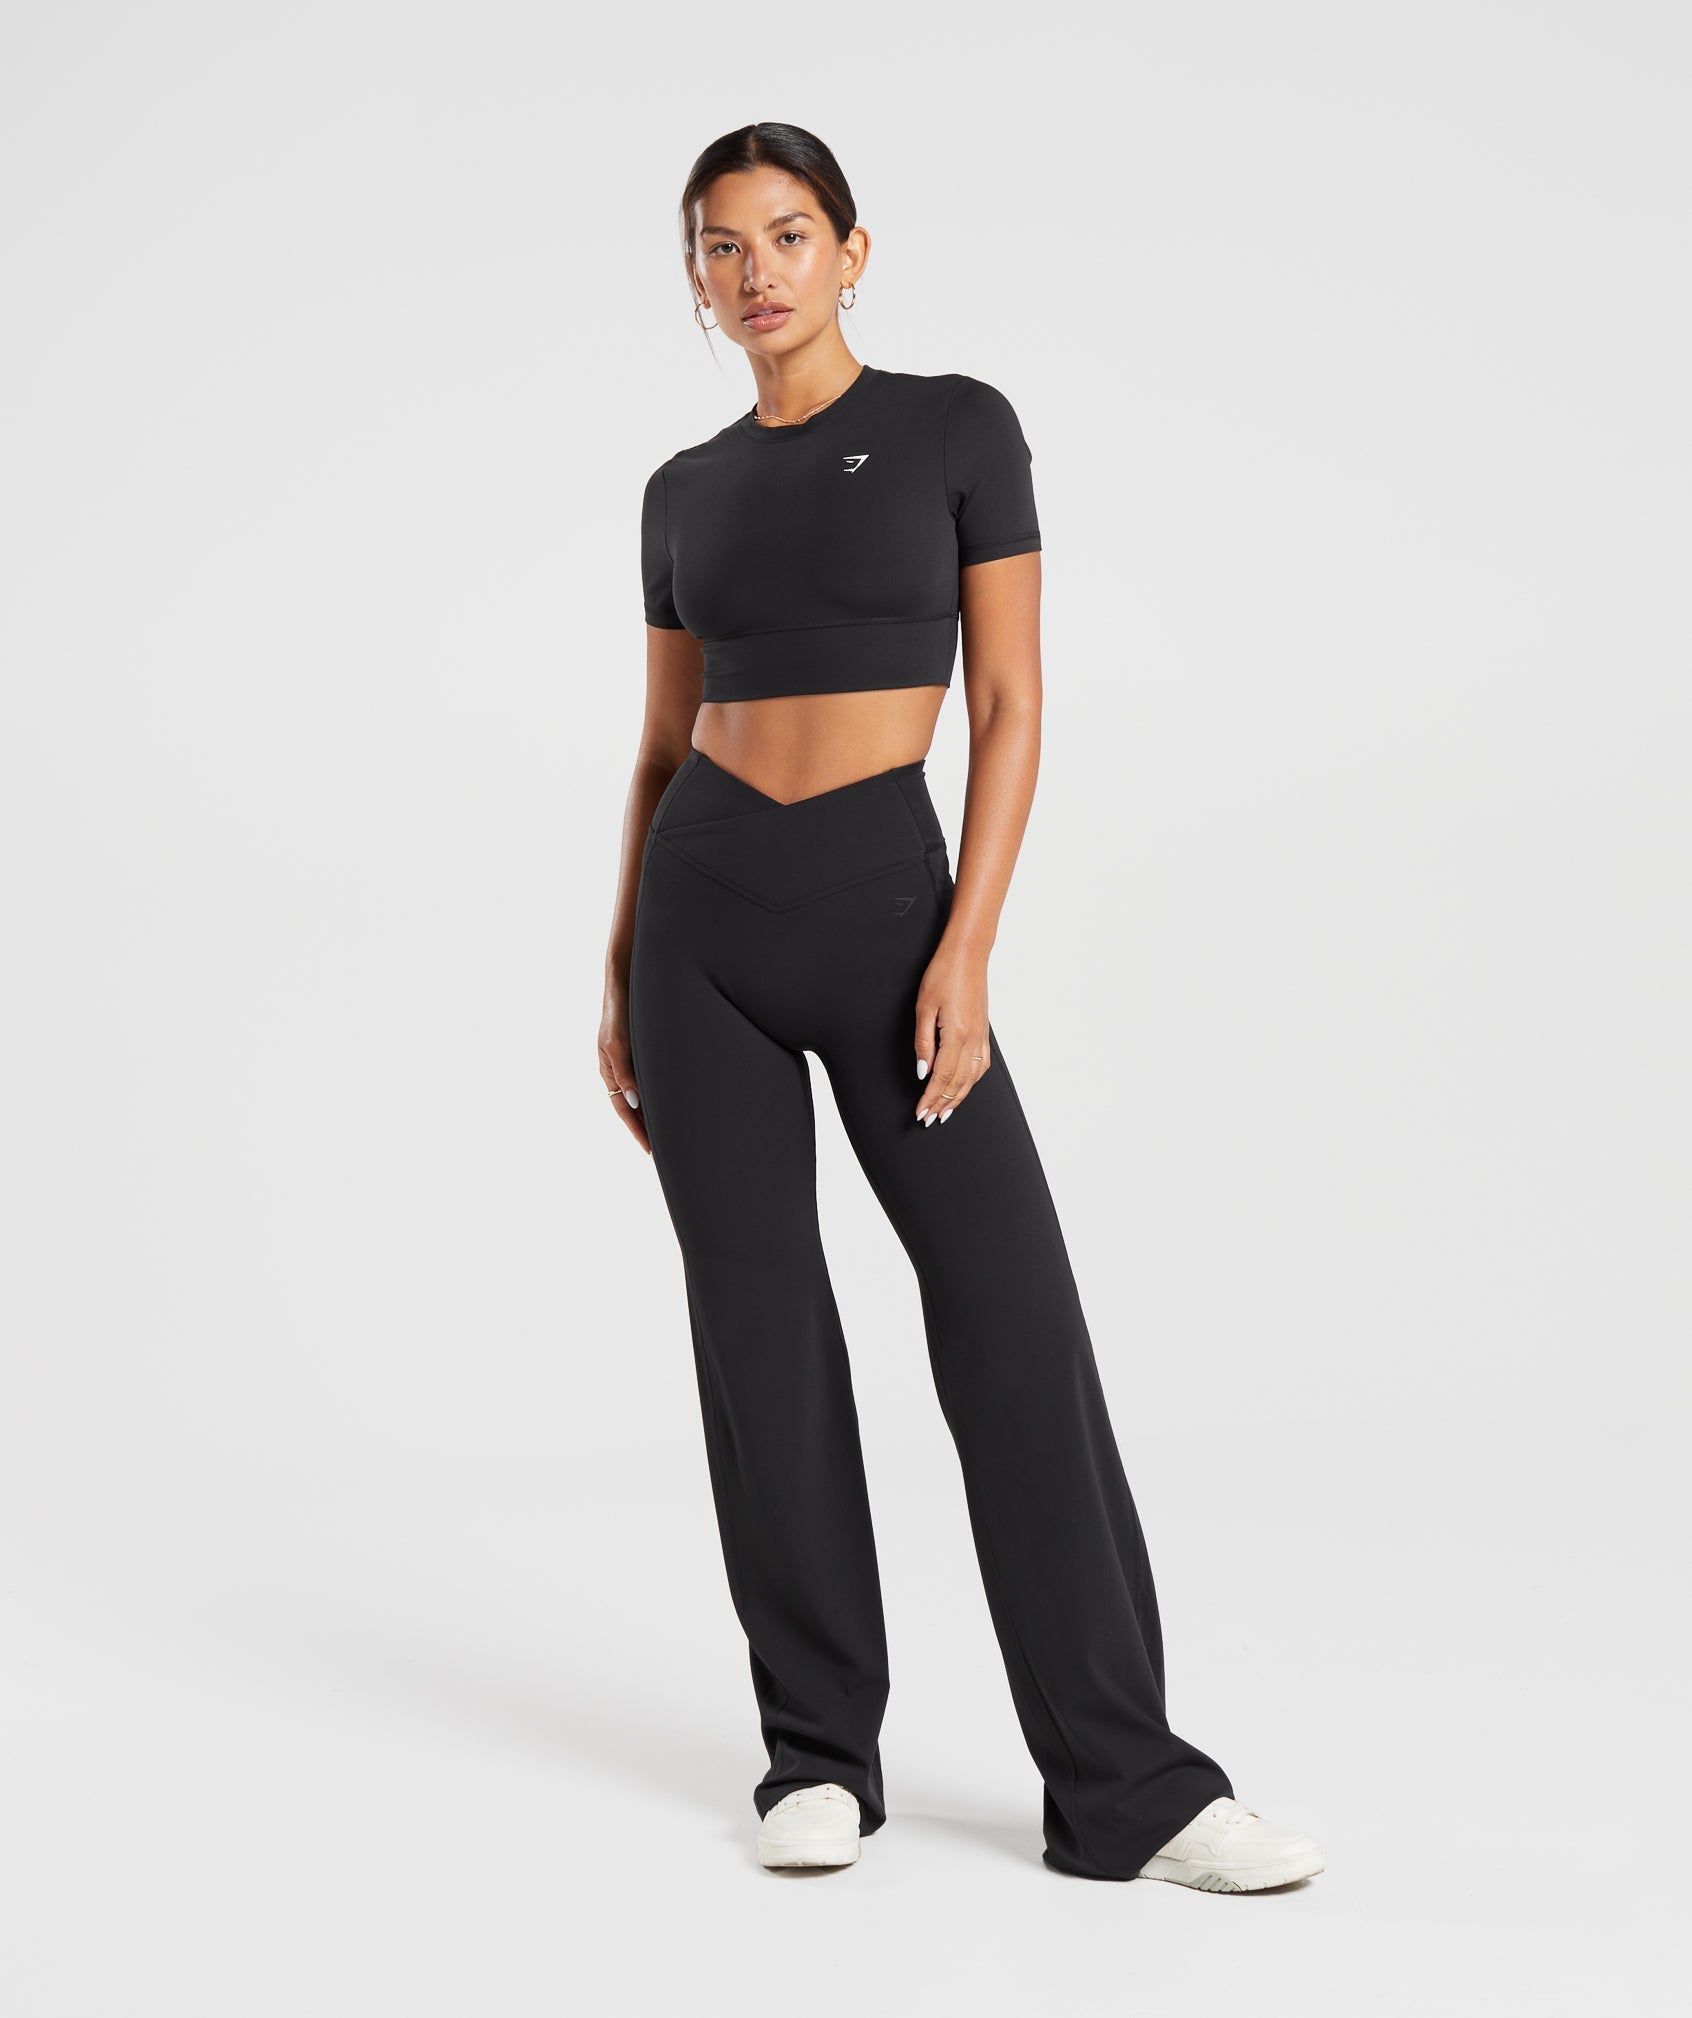 Crossover Crop Top in Black - view 4